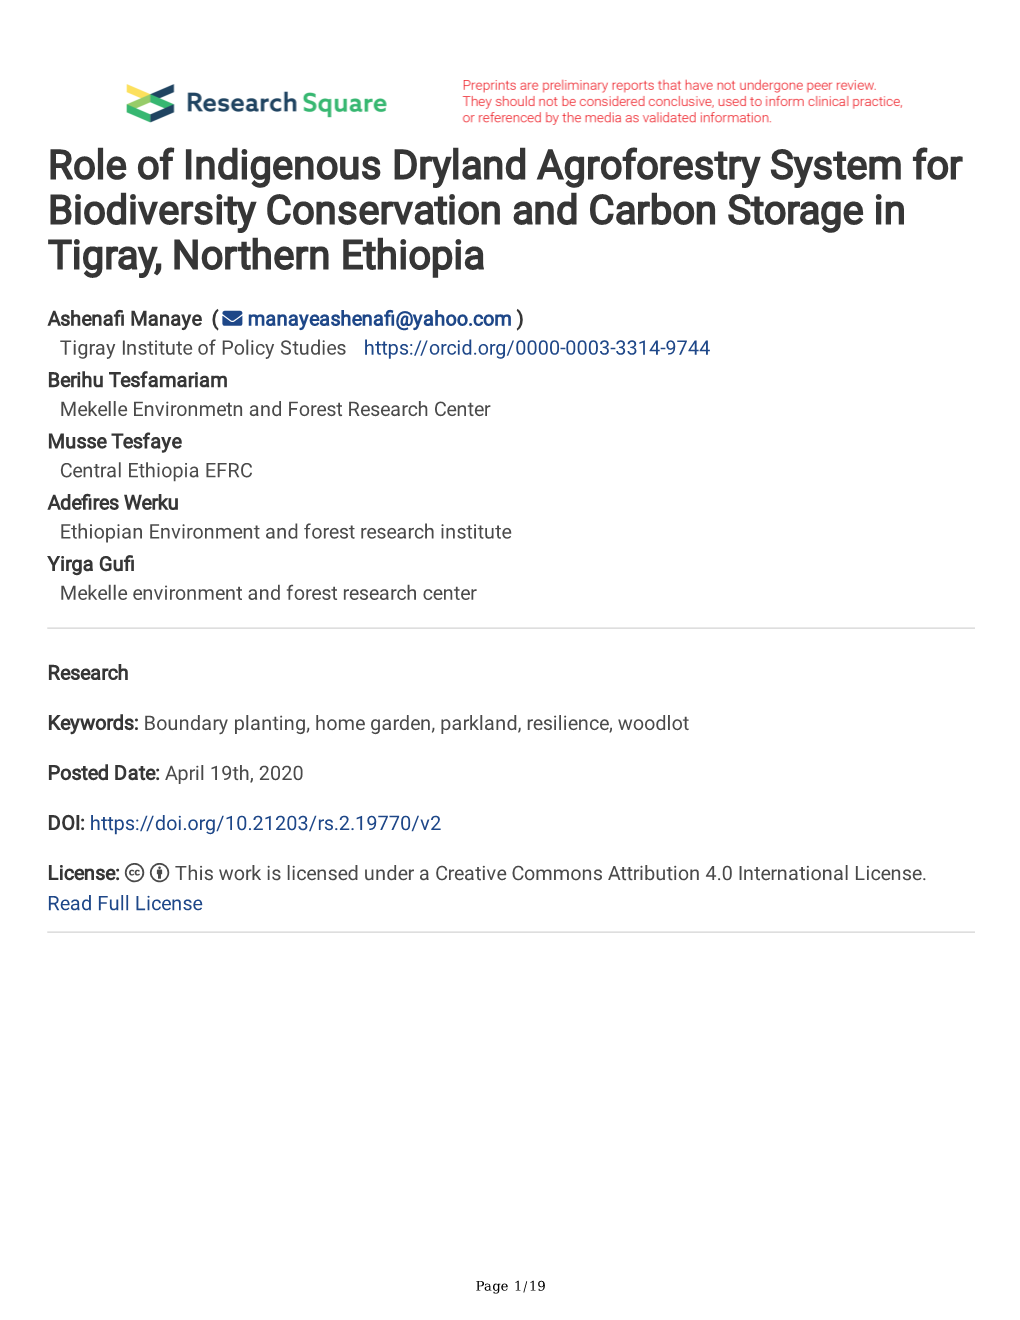 Role of Indigenous Dryland Agroforestry System for Biodiversity Conservation and Carbon Storage in Tigray, Northern Ethiopia